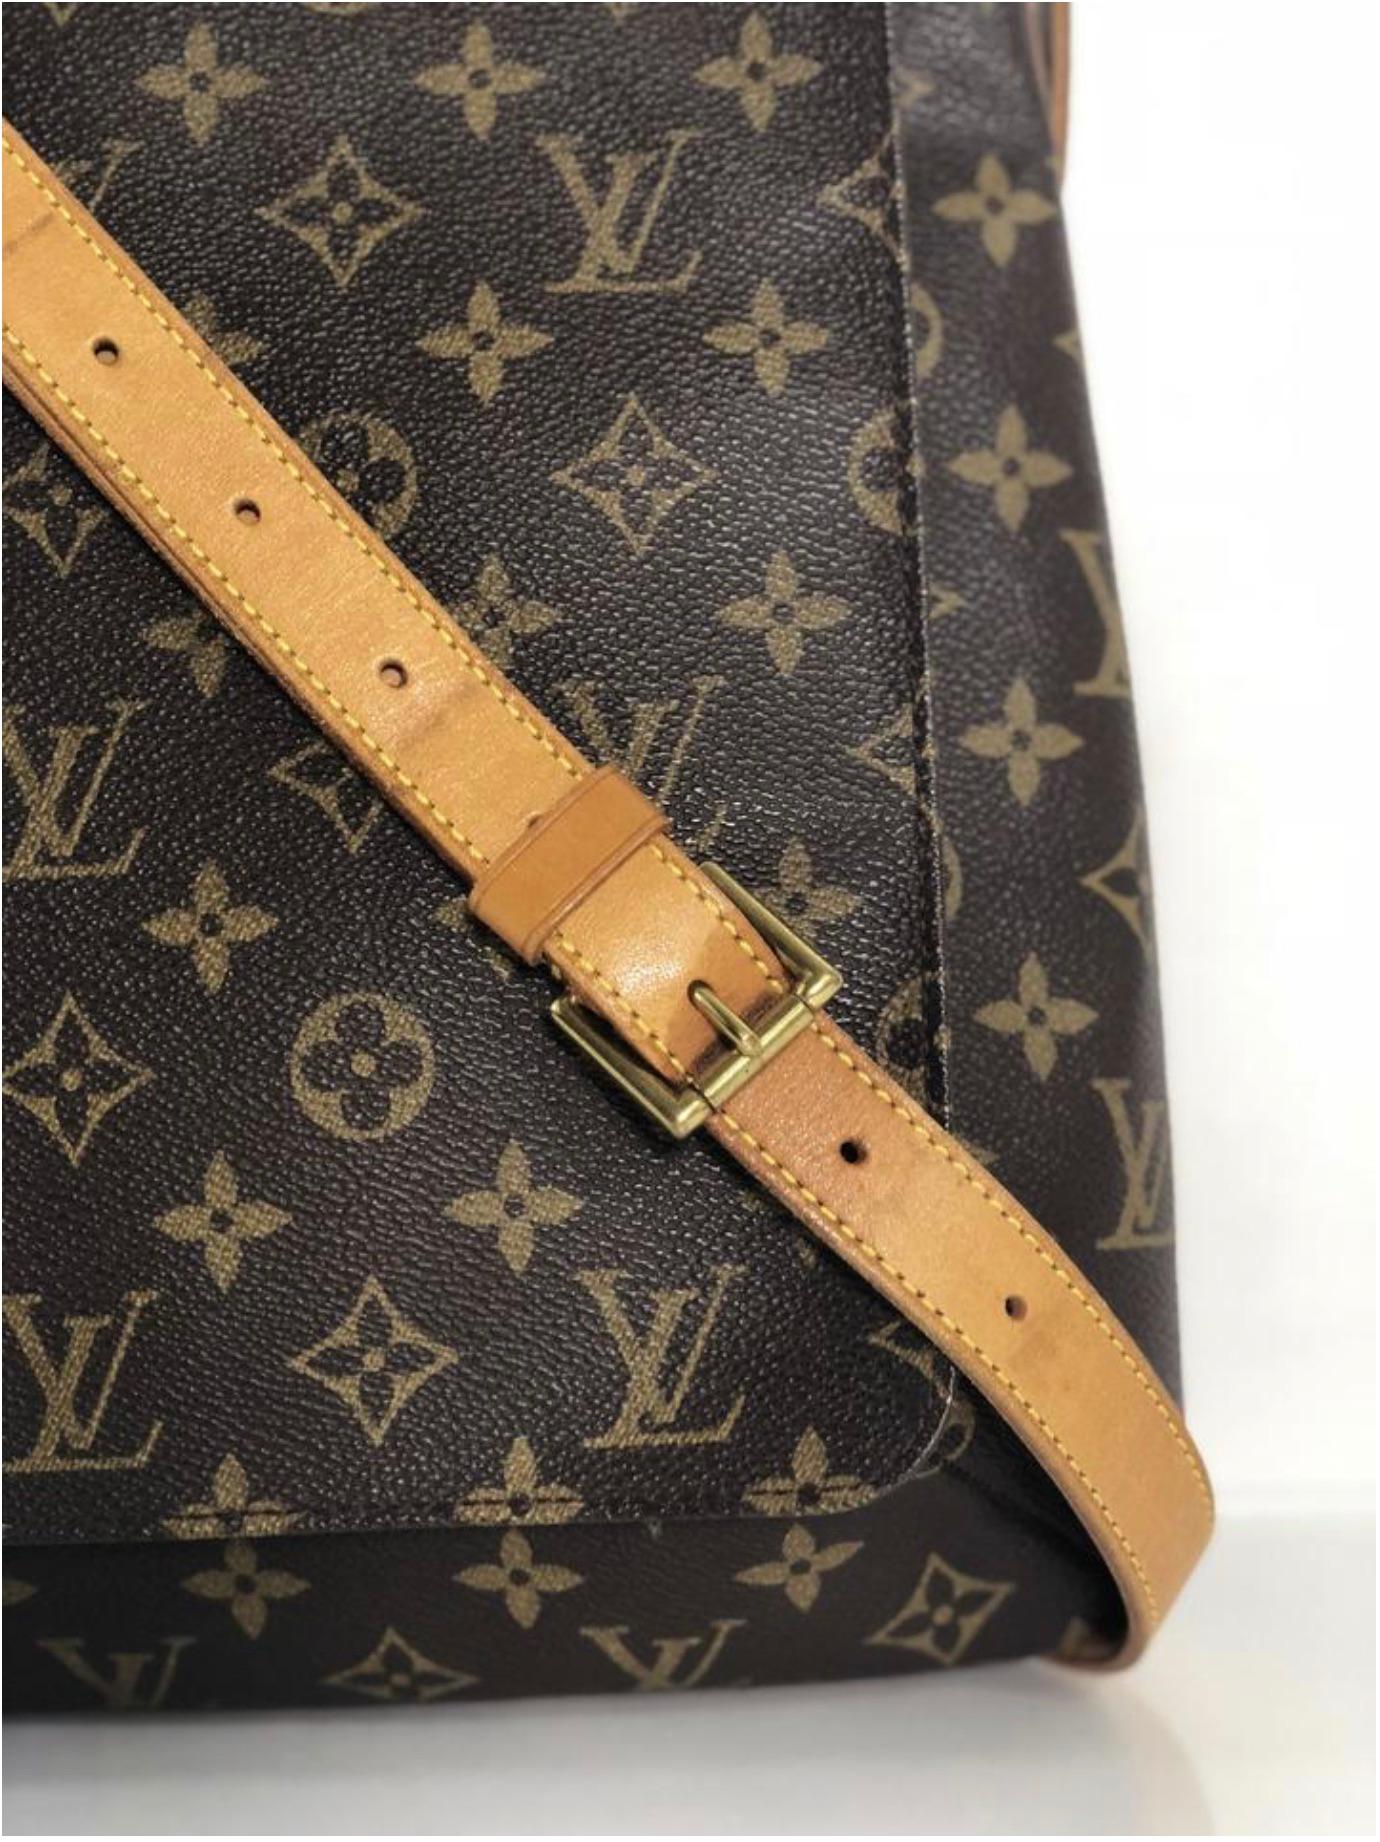 MODEL - Louis Vuitton Monogram Musette Salsa GM Crossbody Shoulder Handbag

CONDITION - Exceptional! Medium vachette, light watermarks, no handle darkening, no dryness. Light marks on strap from hardware. Bright and shiny hardware with no